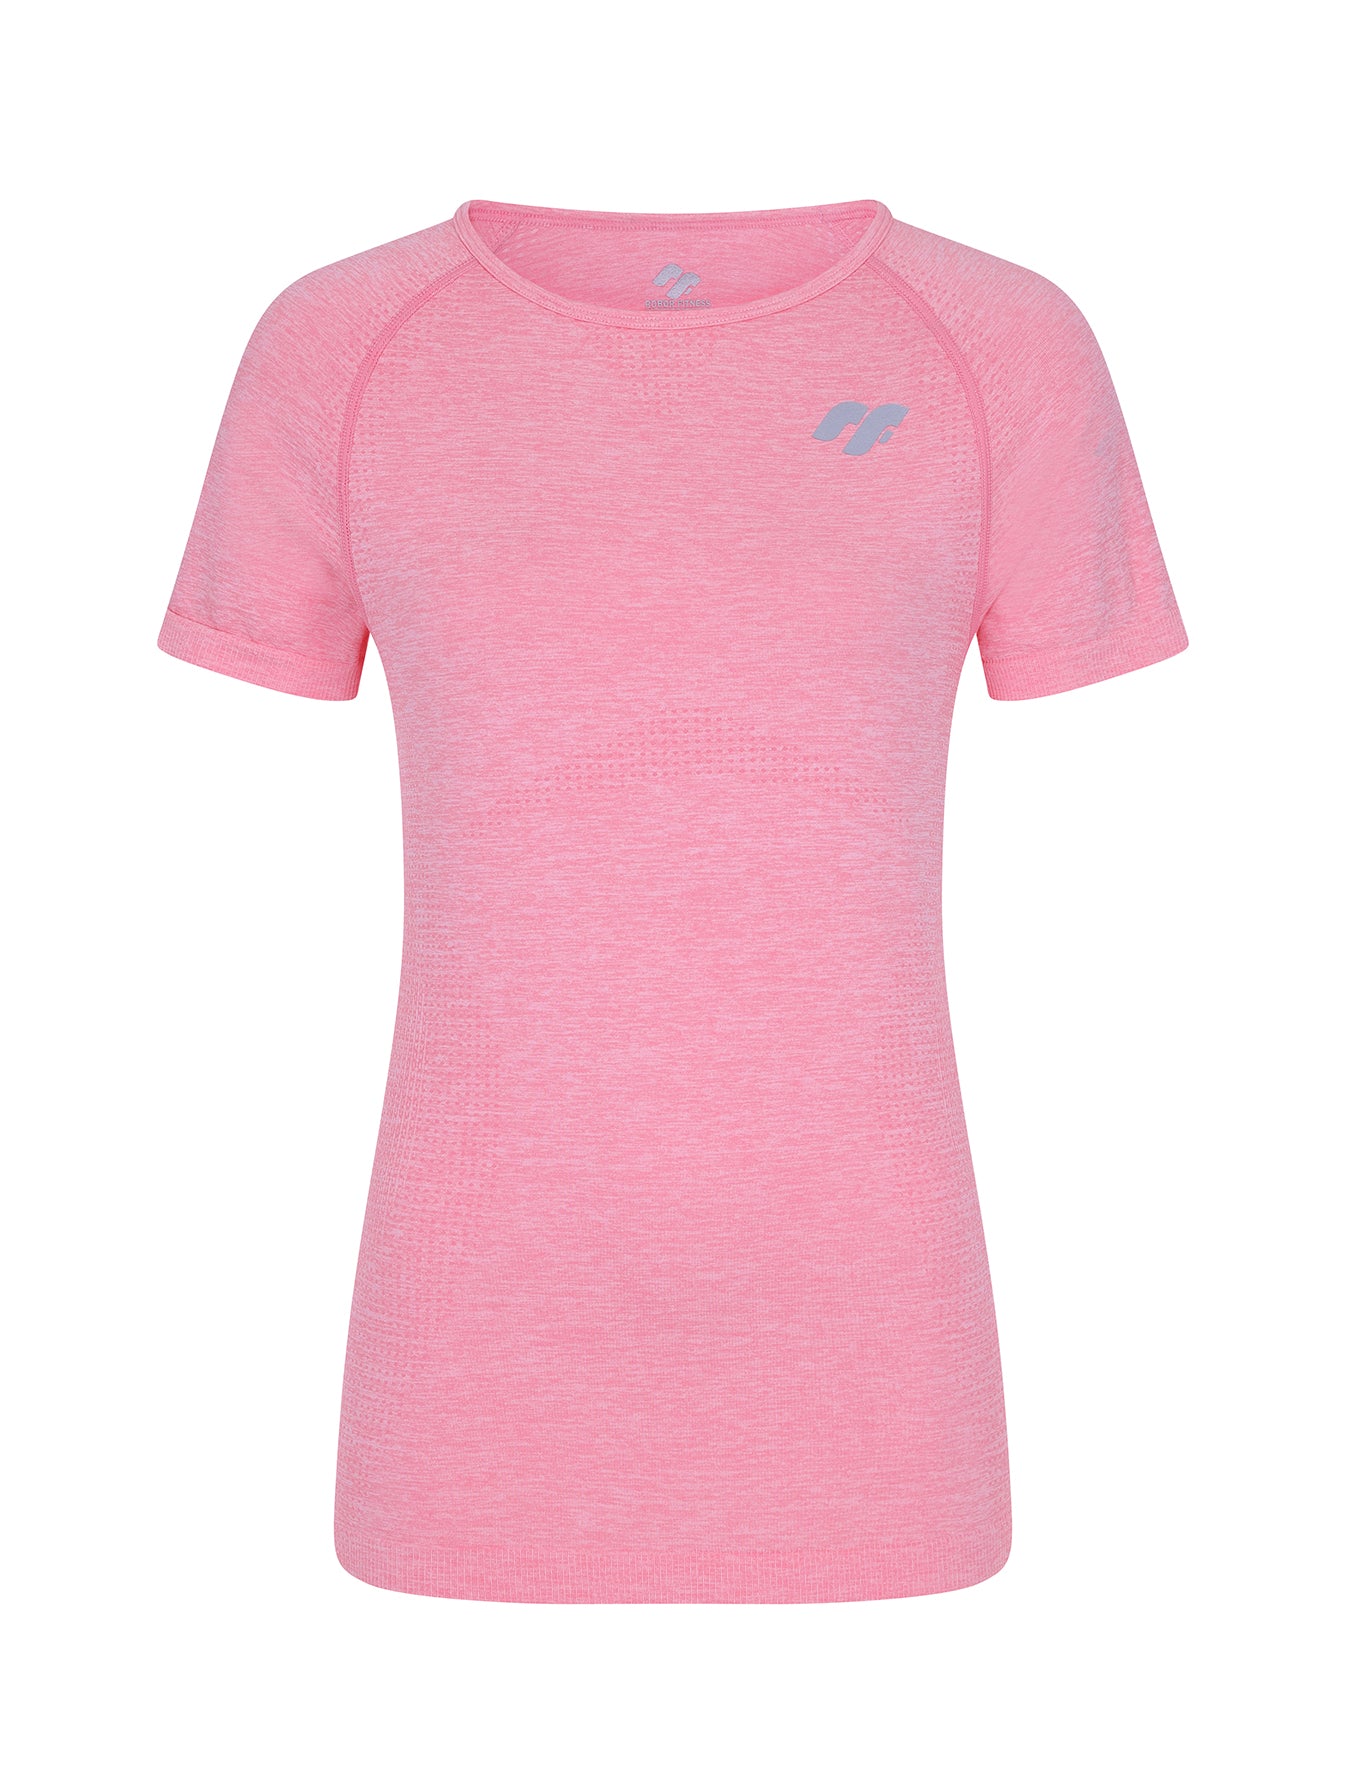 Tops & T-Shirts | Graphic Seamless Tank Top Pearl Grey And Sorbet Pink -  Repetto Womens ⋆ HostnDost